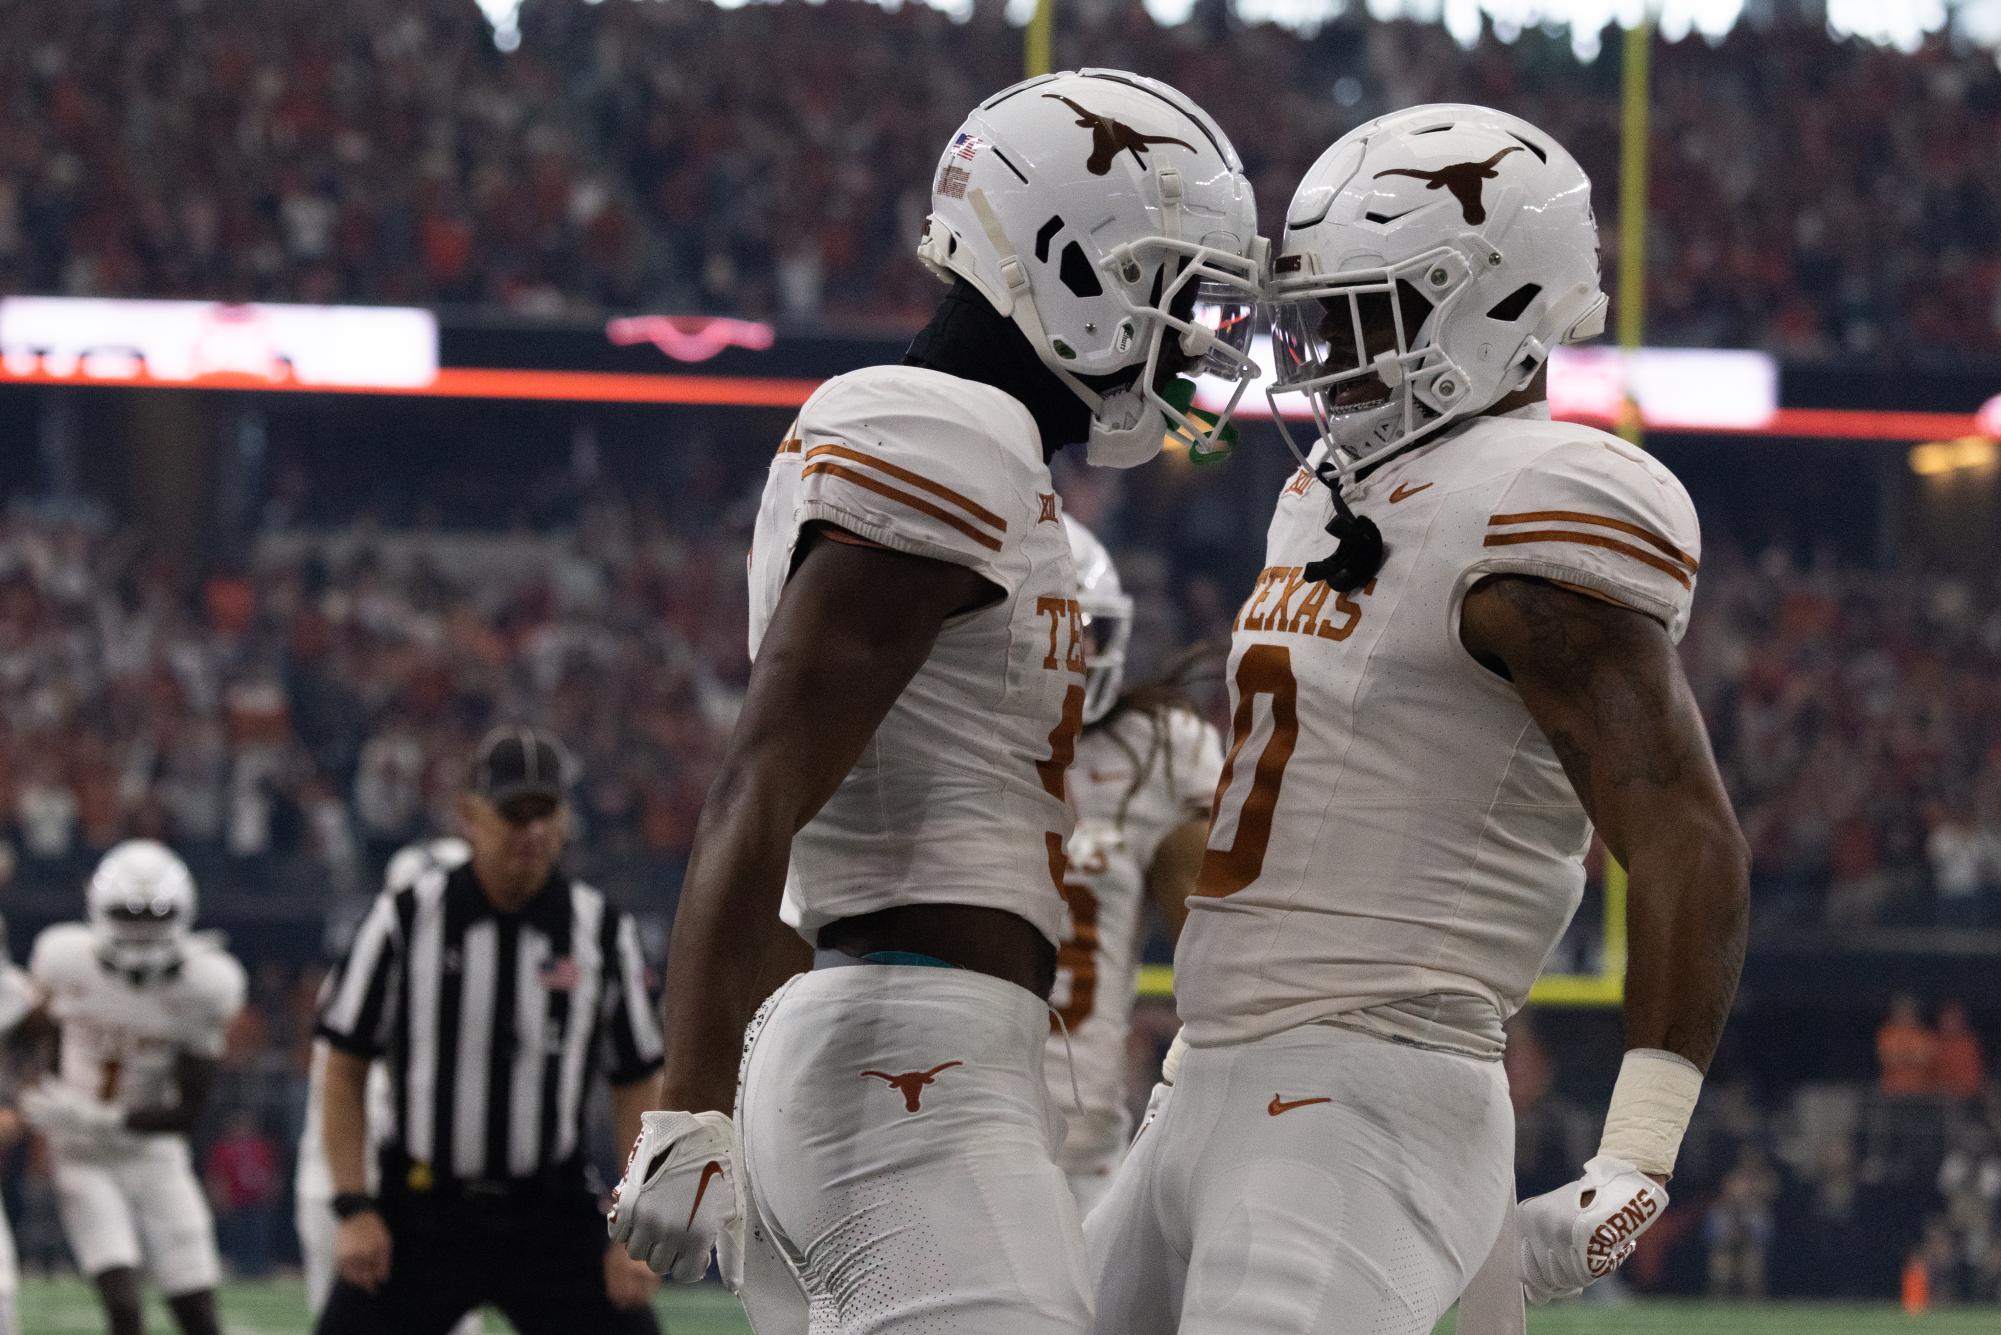 Texas remains at No. 7 in the third College Football Playoff